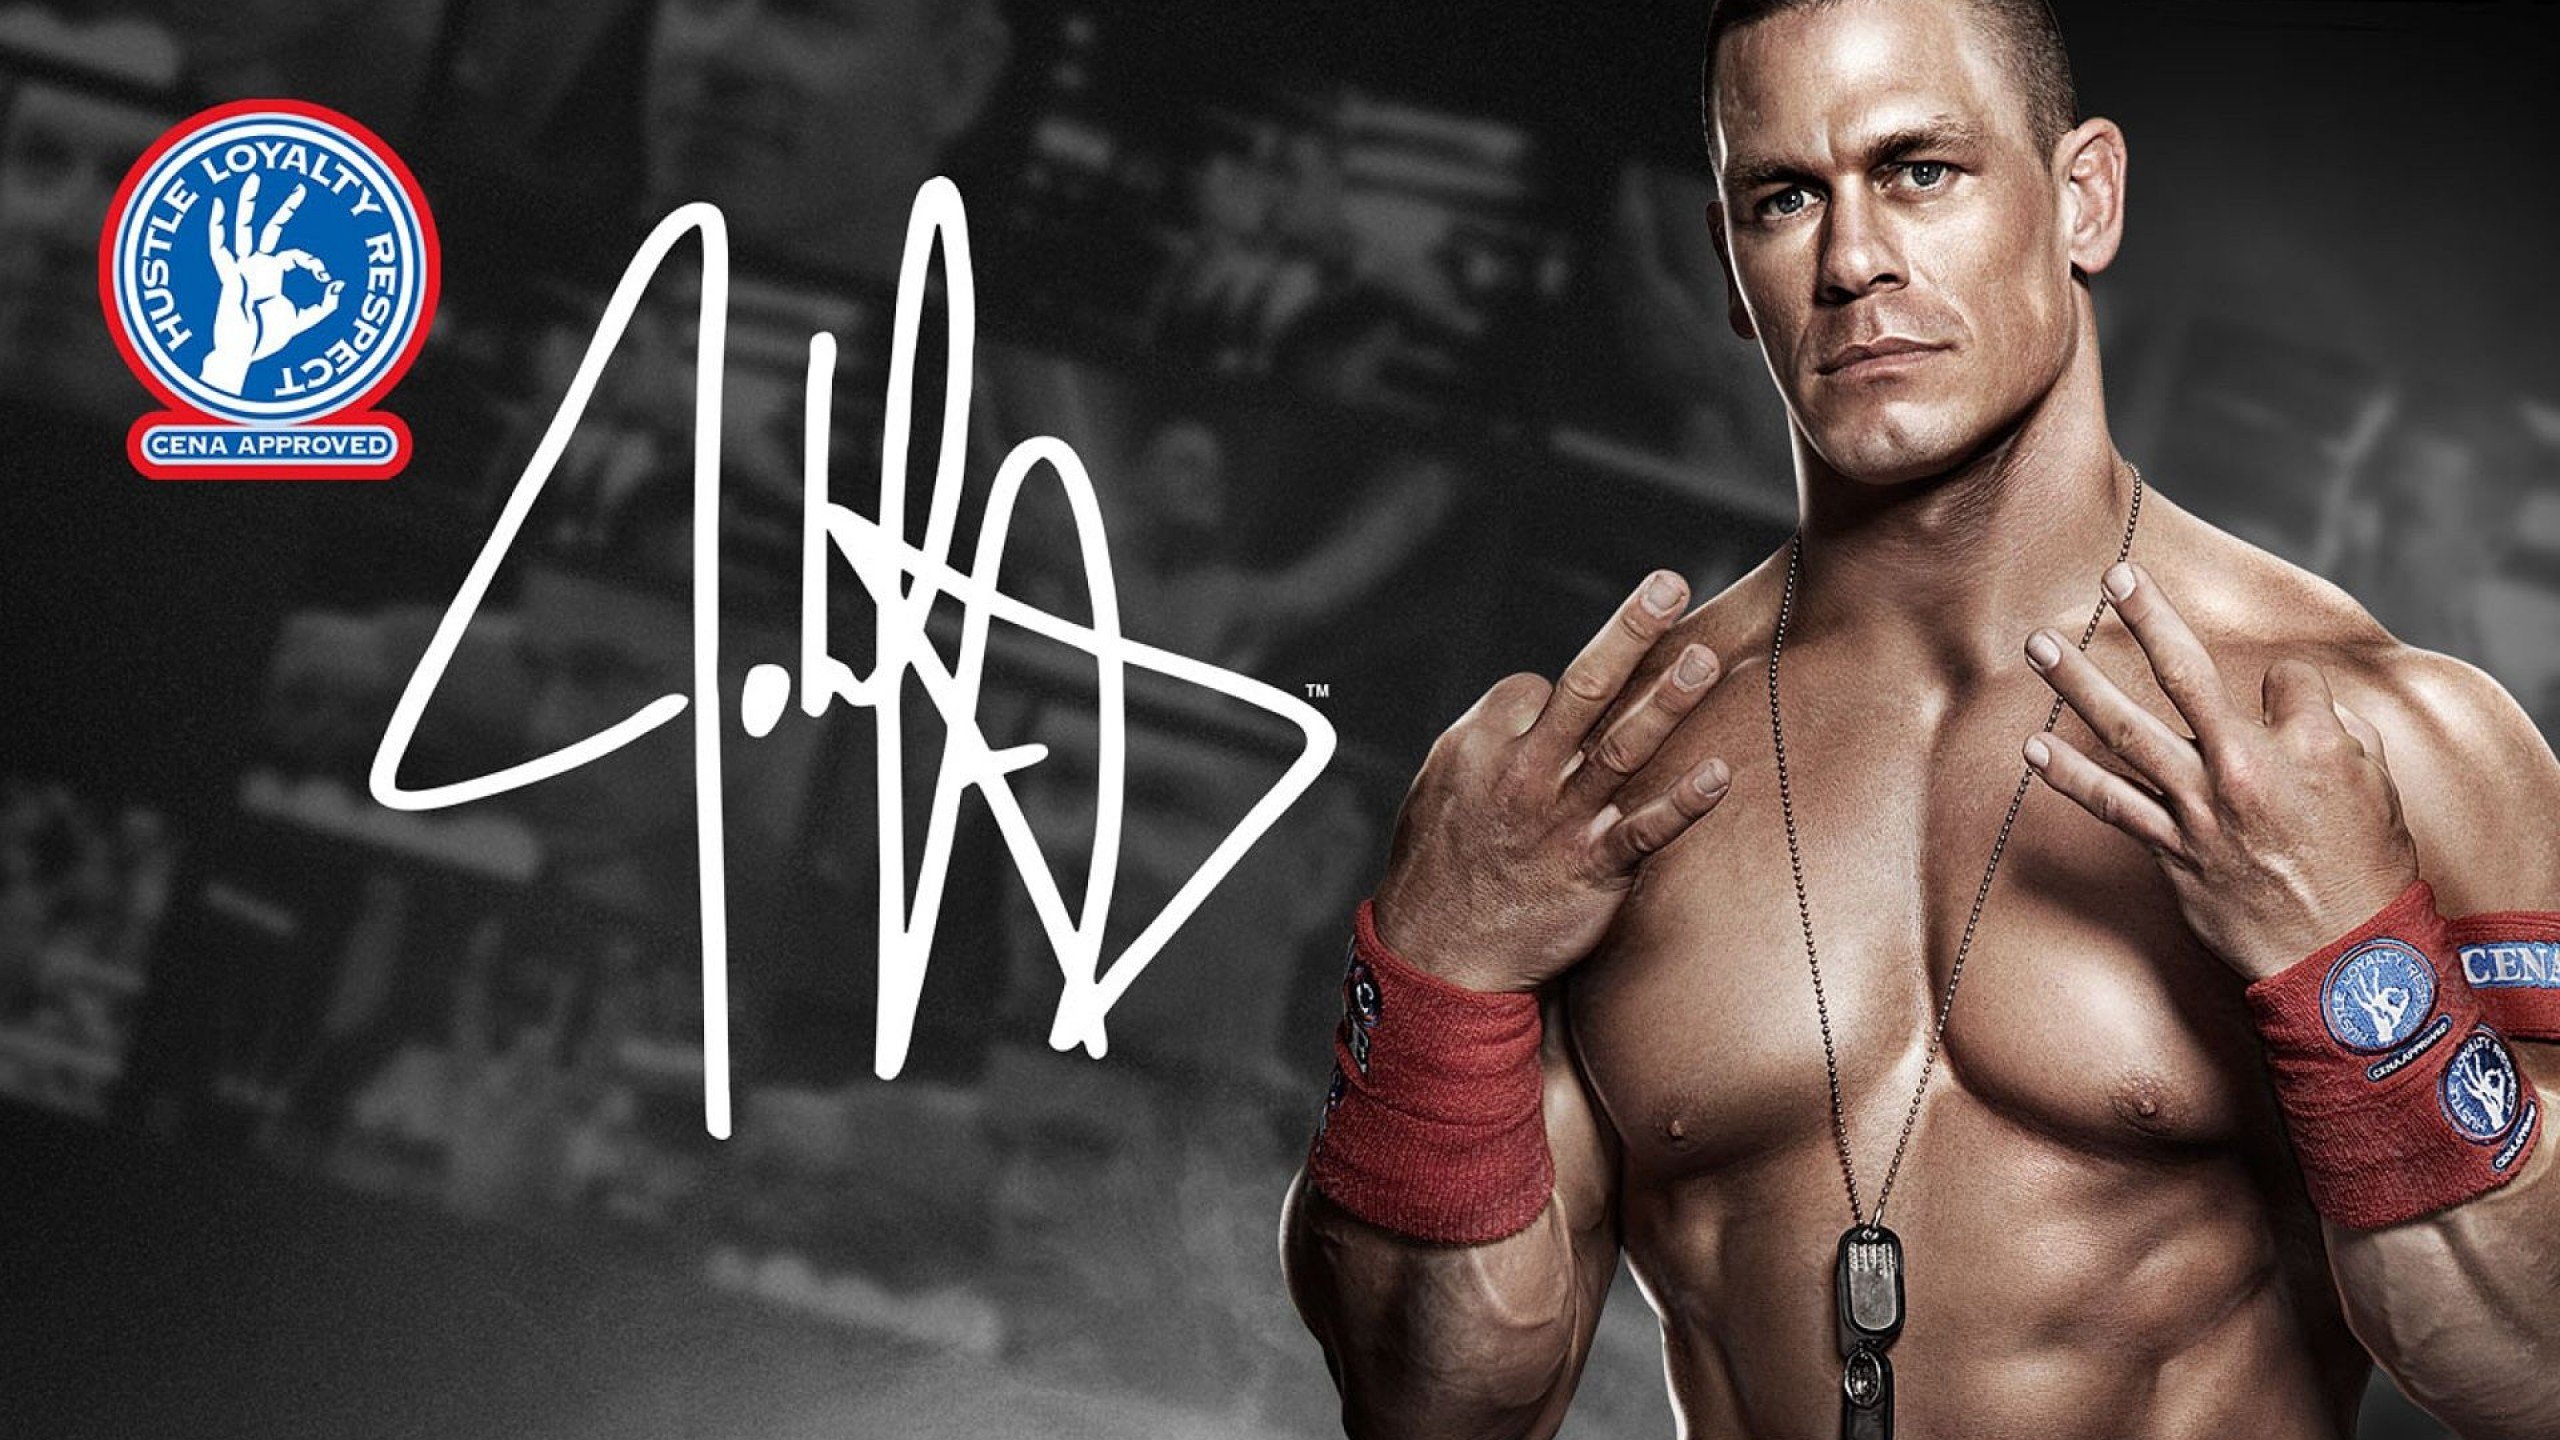 Awesome John Cena free background ID:92954 for hd 2560x1440 desktop